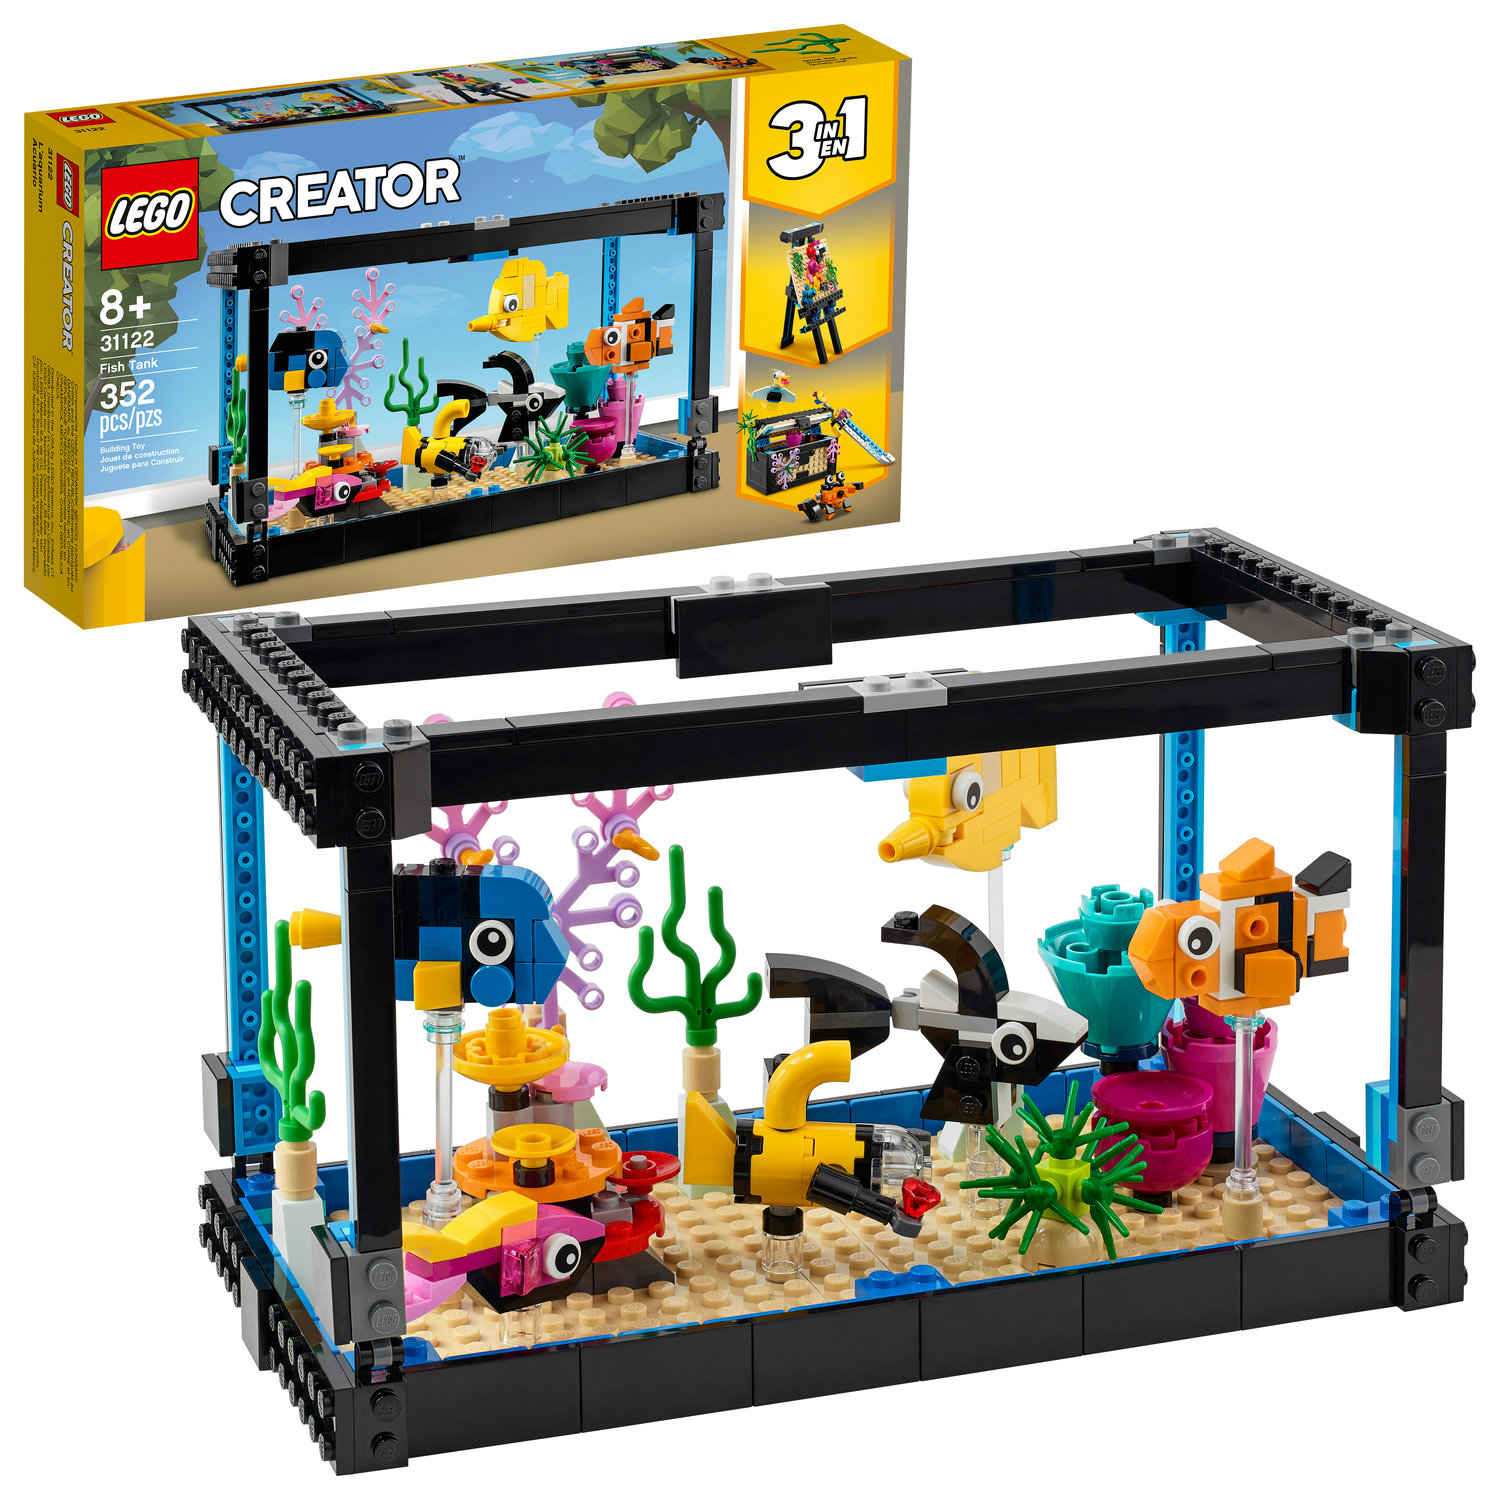 LEGO Creator 3in1 Fish Tank 31122 BuildingToy; Great Gift for Kids (352 Pieces) - image 1 of 10